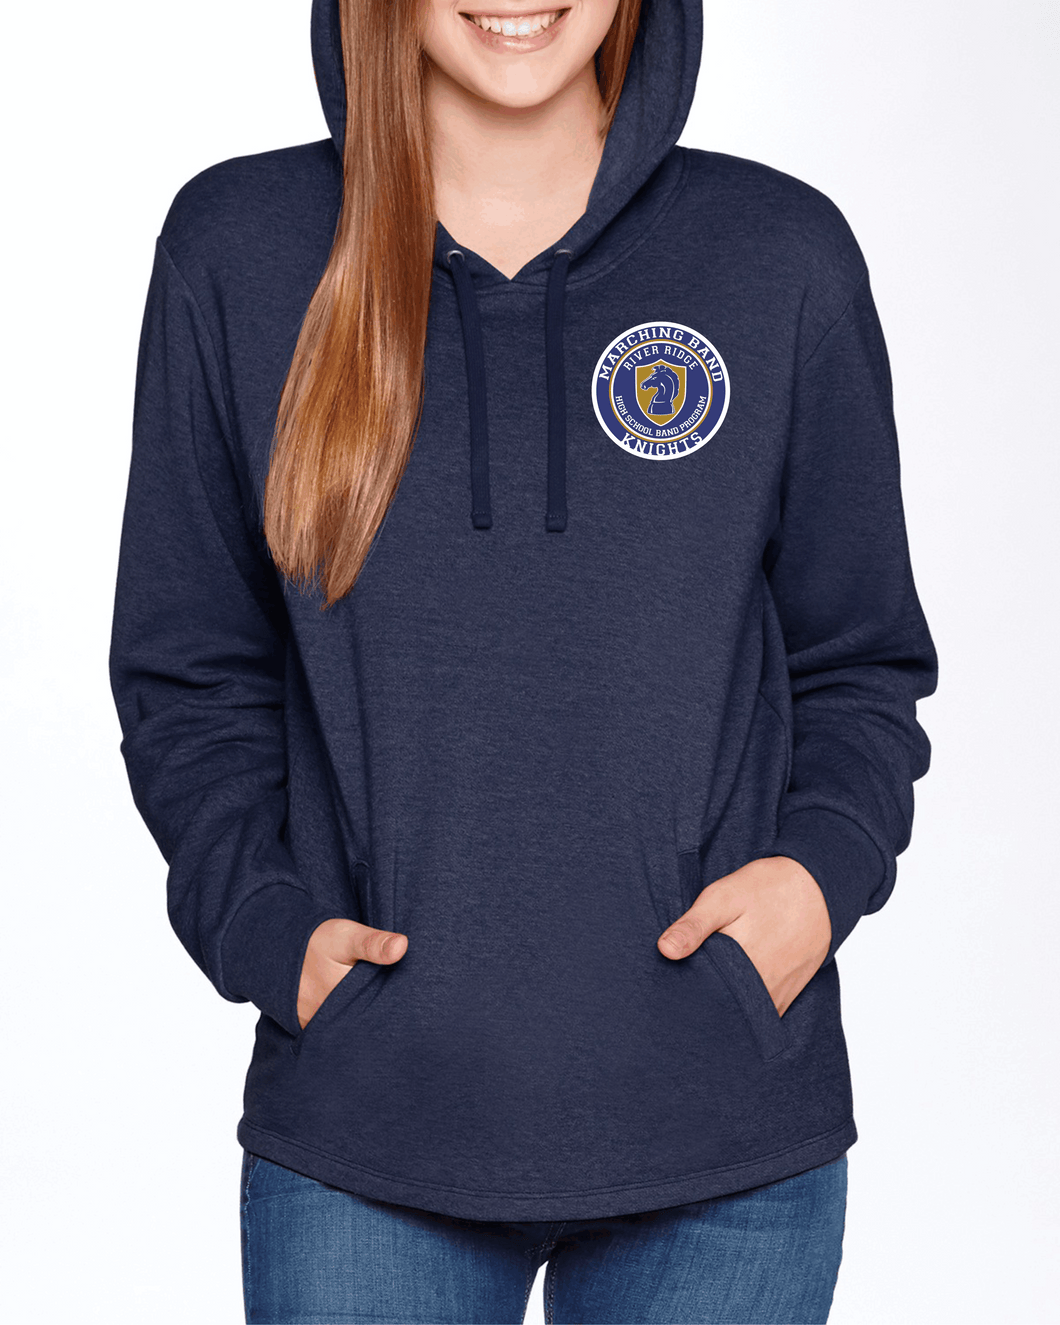 RR-BND-314-2 - Next Level Adult PCH Pullover Hoodie - RR Marching Band Logo